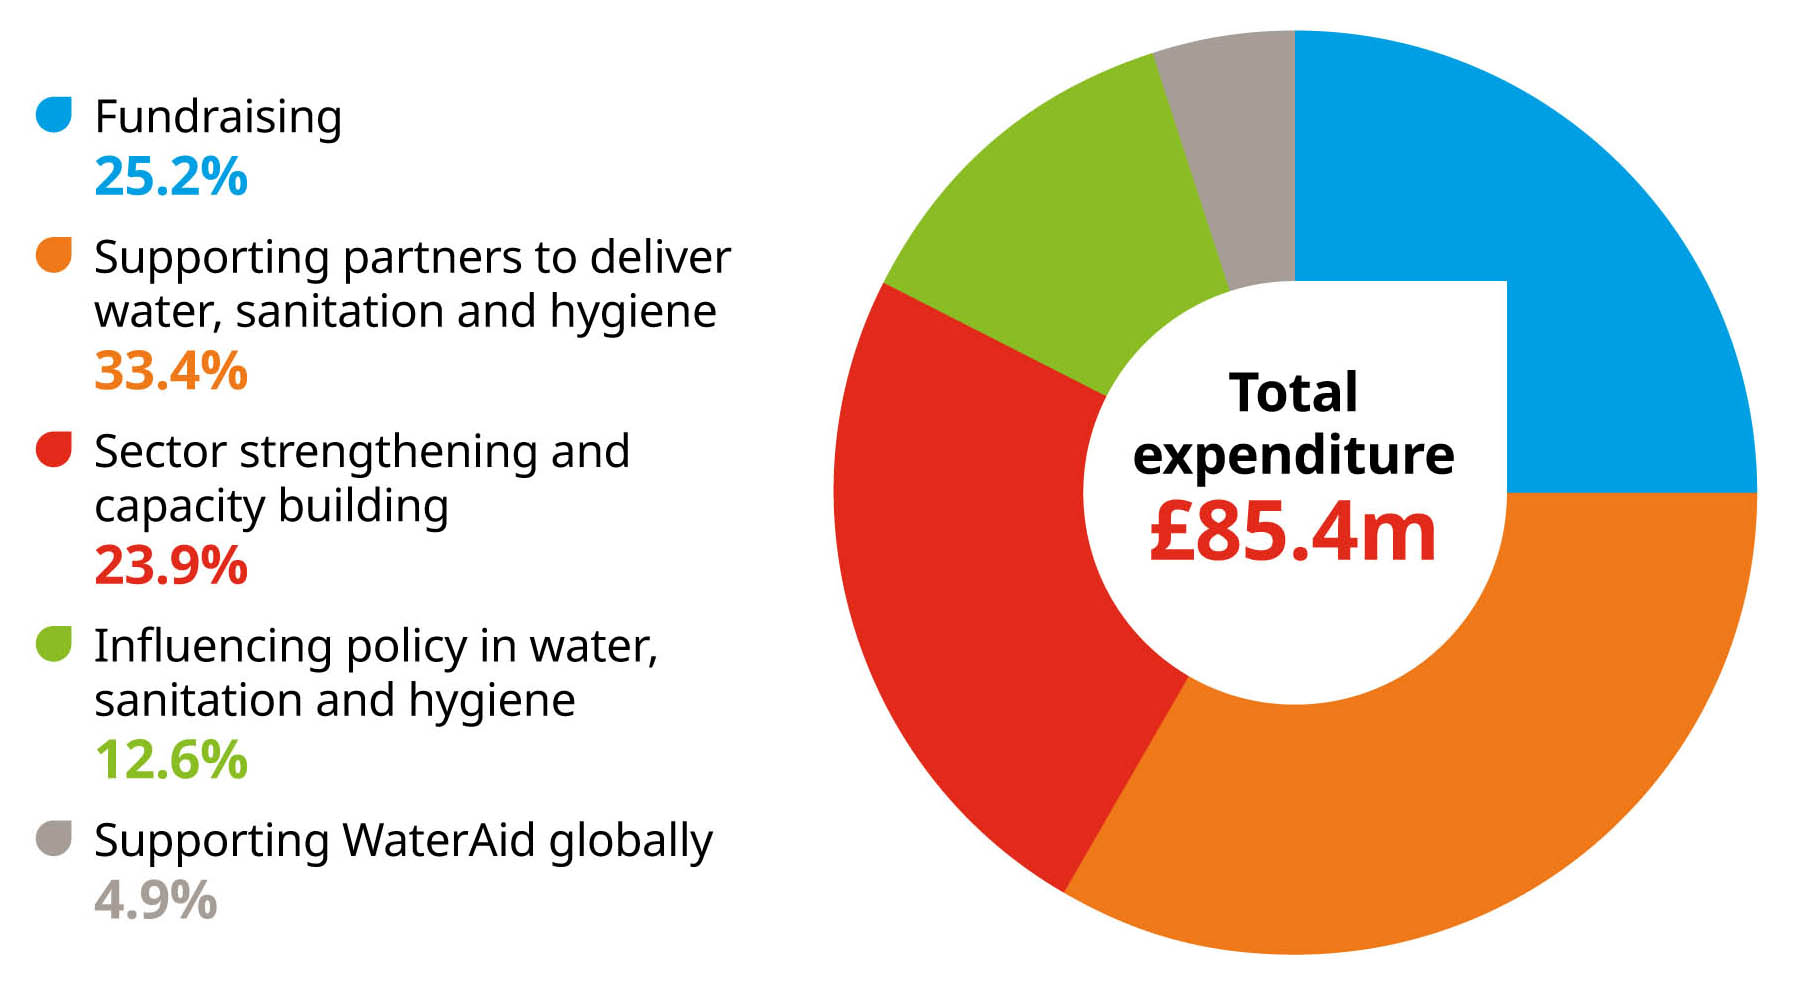 Pie chart showing expenditure: Fundraising 25.2%  Supporting partners to deliver water, sanitation and hygiene 33.4%  Sector strengthening and capacity building 23.9%  Influencing policy in water, sanitation and hygiene 12.6%  Supporting WaterAid globally 4.9%